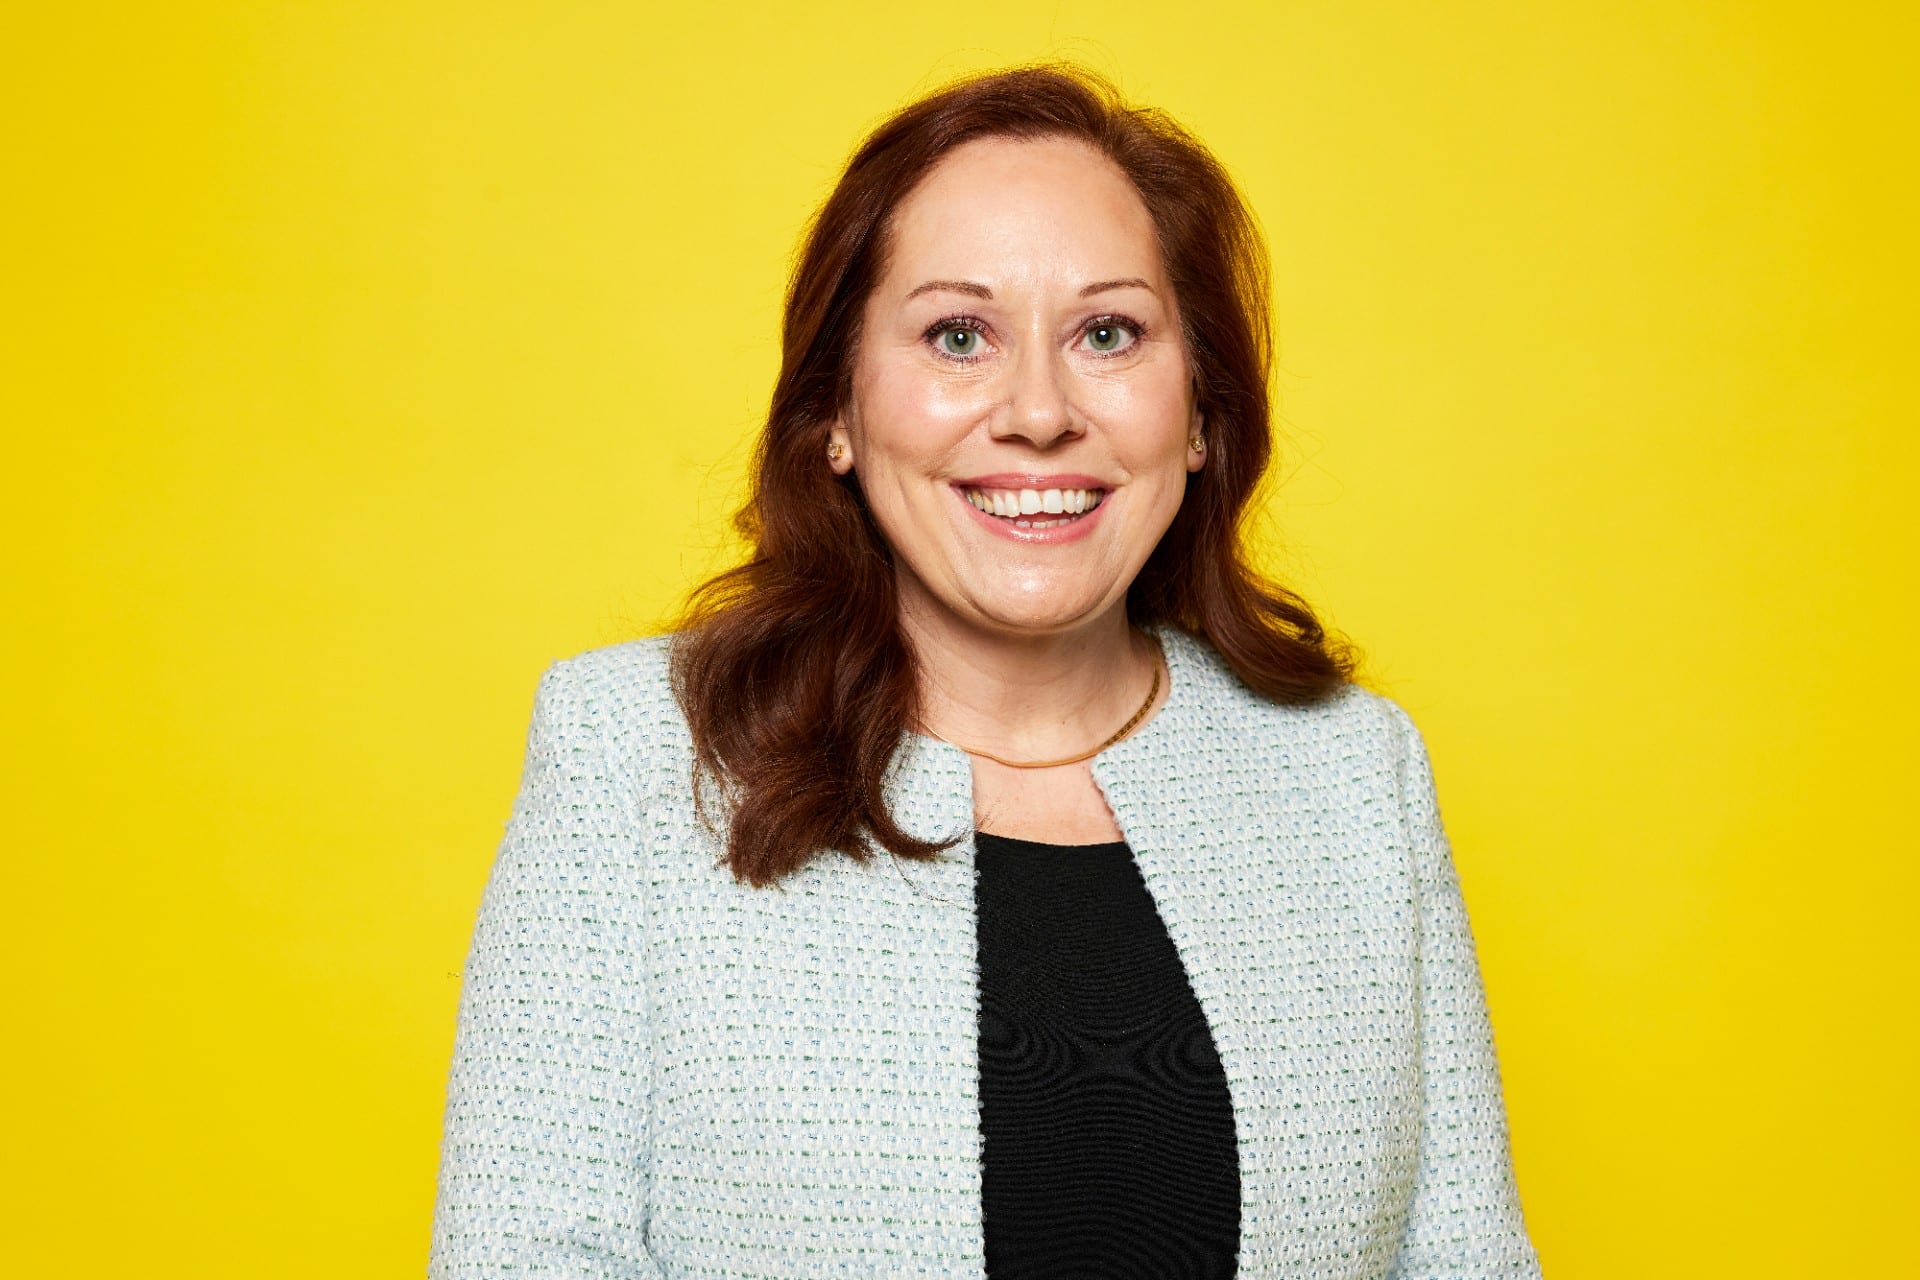 Associate Dean (Post-Experience), UNSW Business School and Academic Director of AGSM Associate Professor Michele Roberts